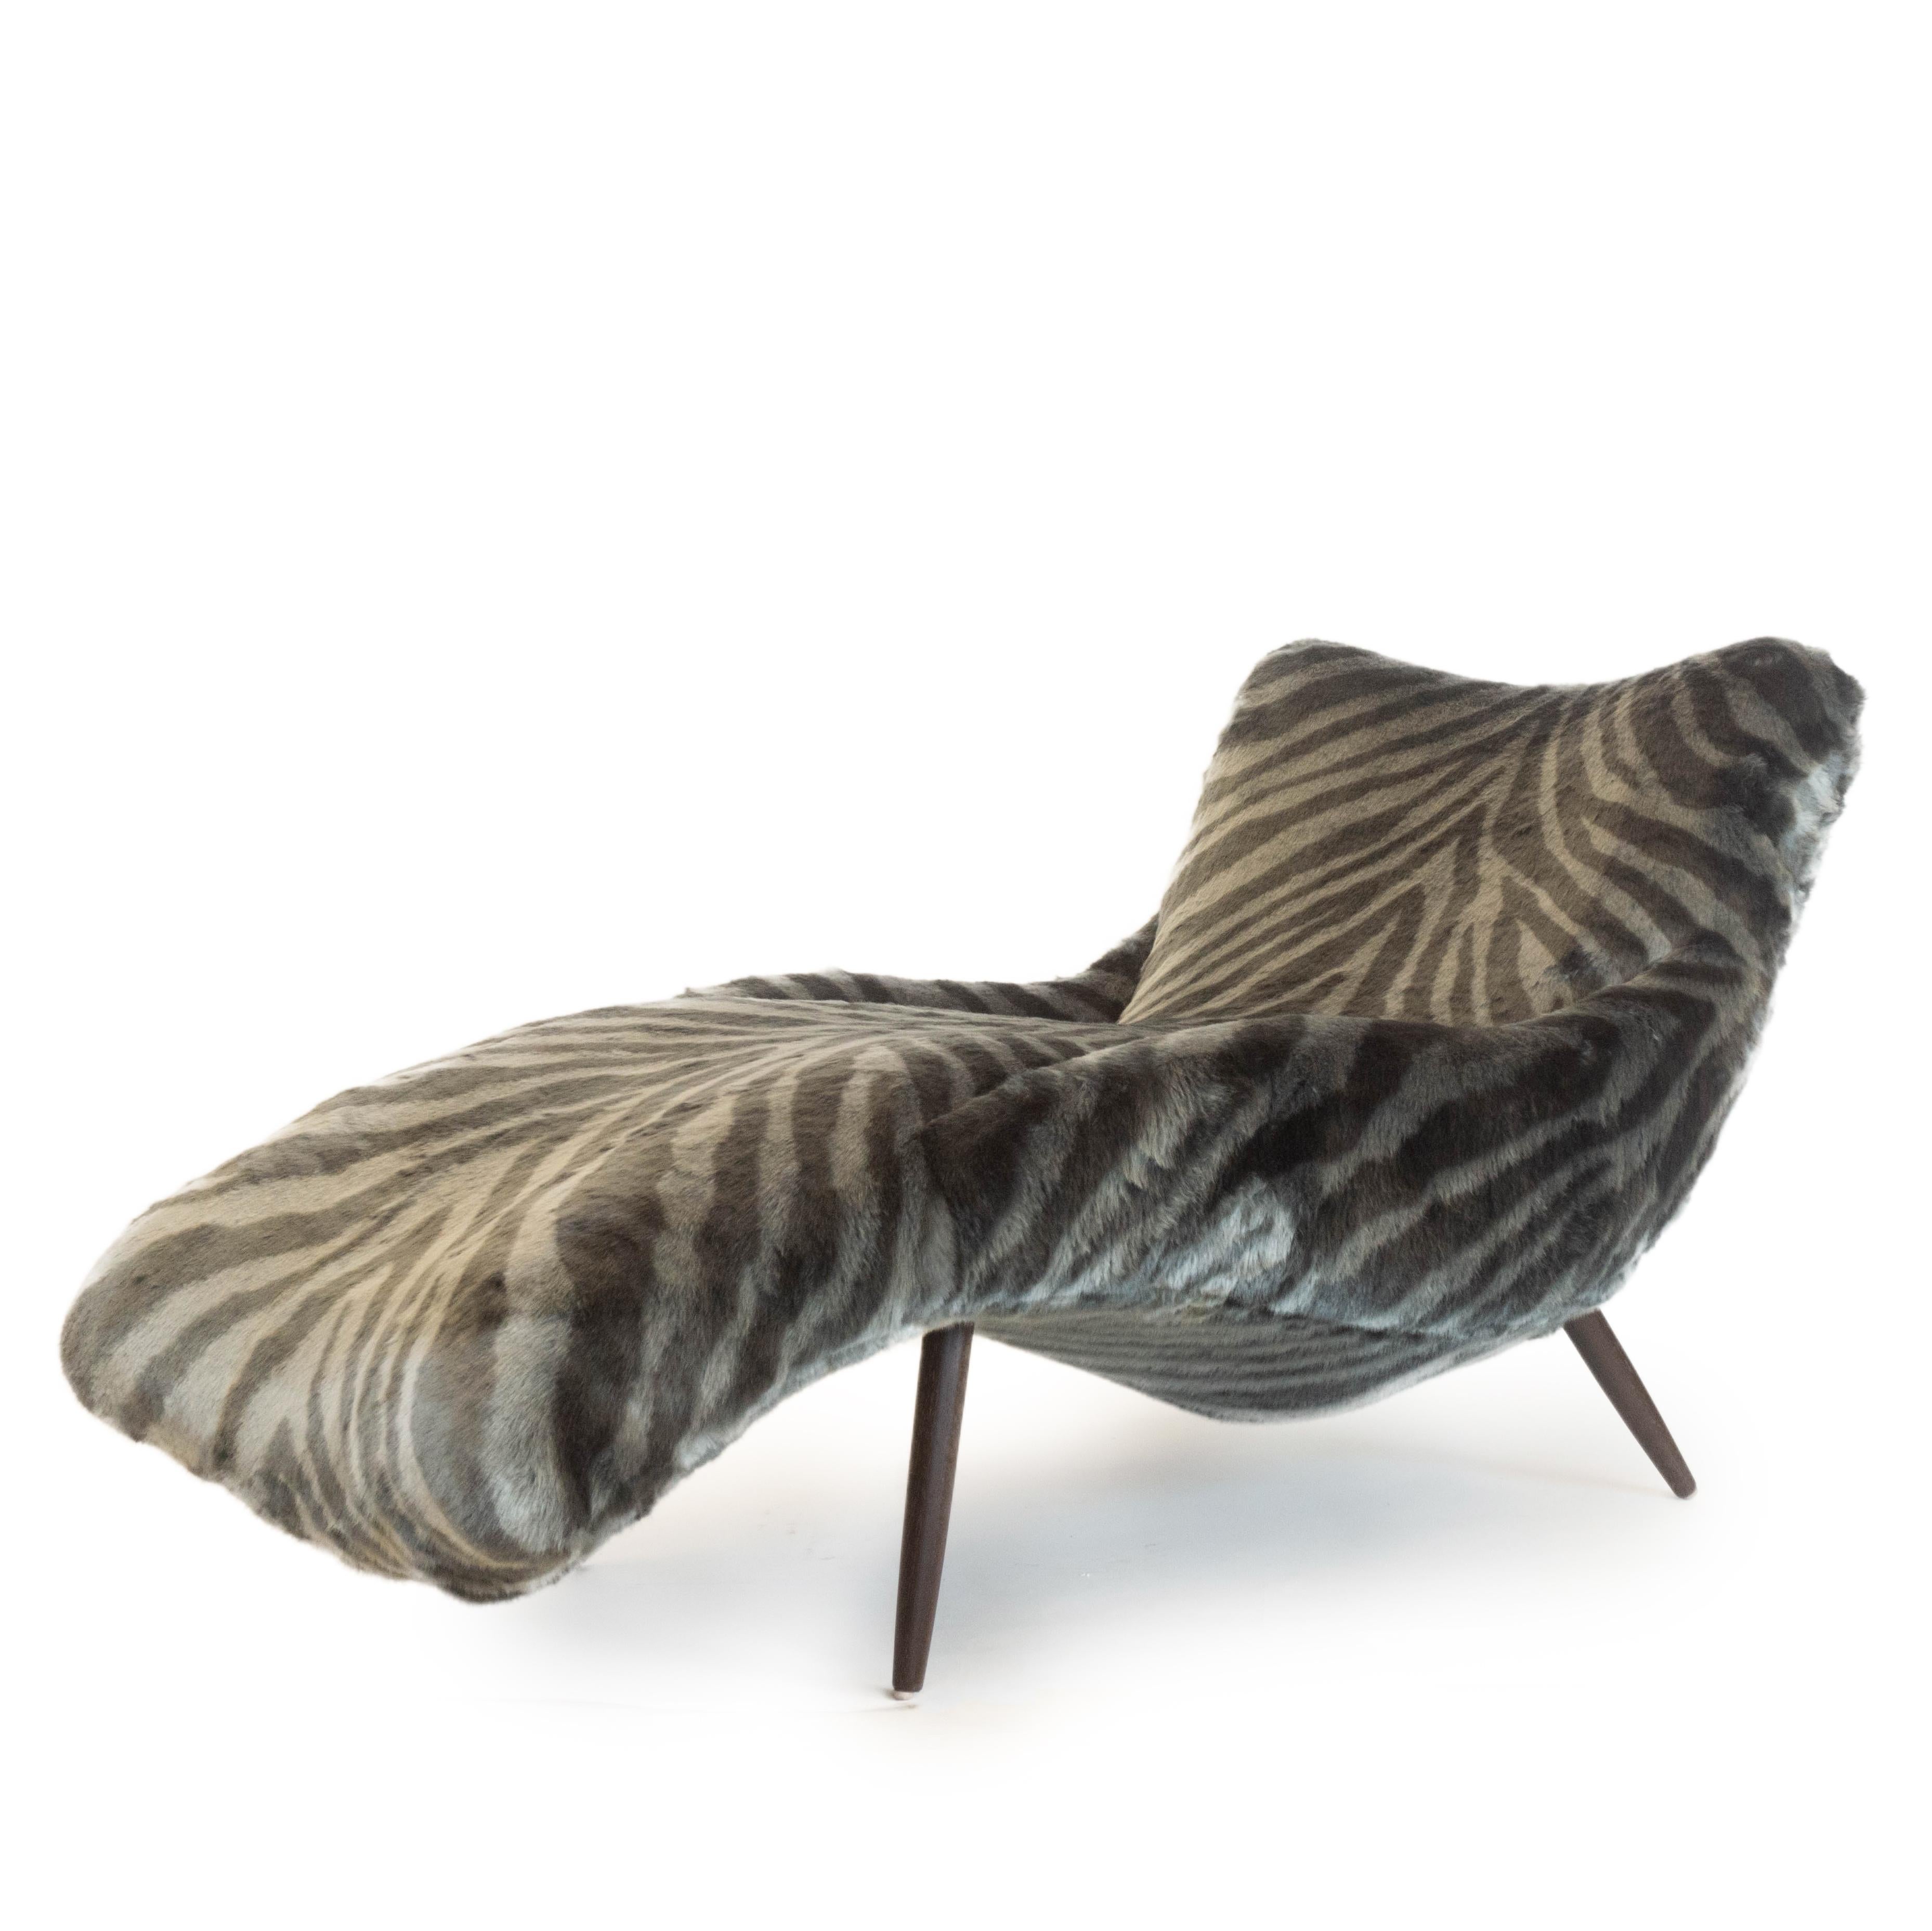 A lounge chair hand built by us in Norwalk, Connecticut upholstered in a soft faux tiger fur. This piece features a super comfortable sloping design for ultimate relaxation. This lounge chair also features exposed tapered legs made out of walnut.